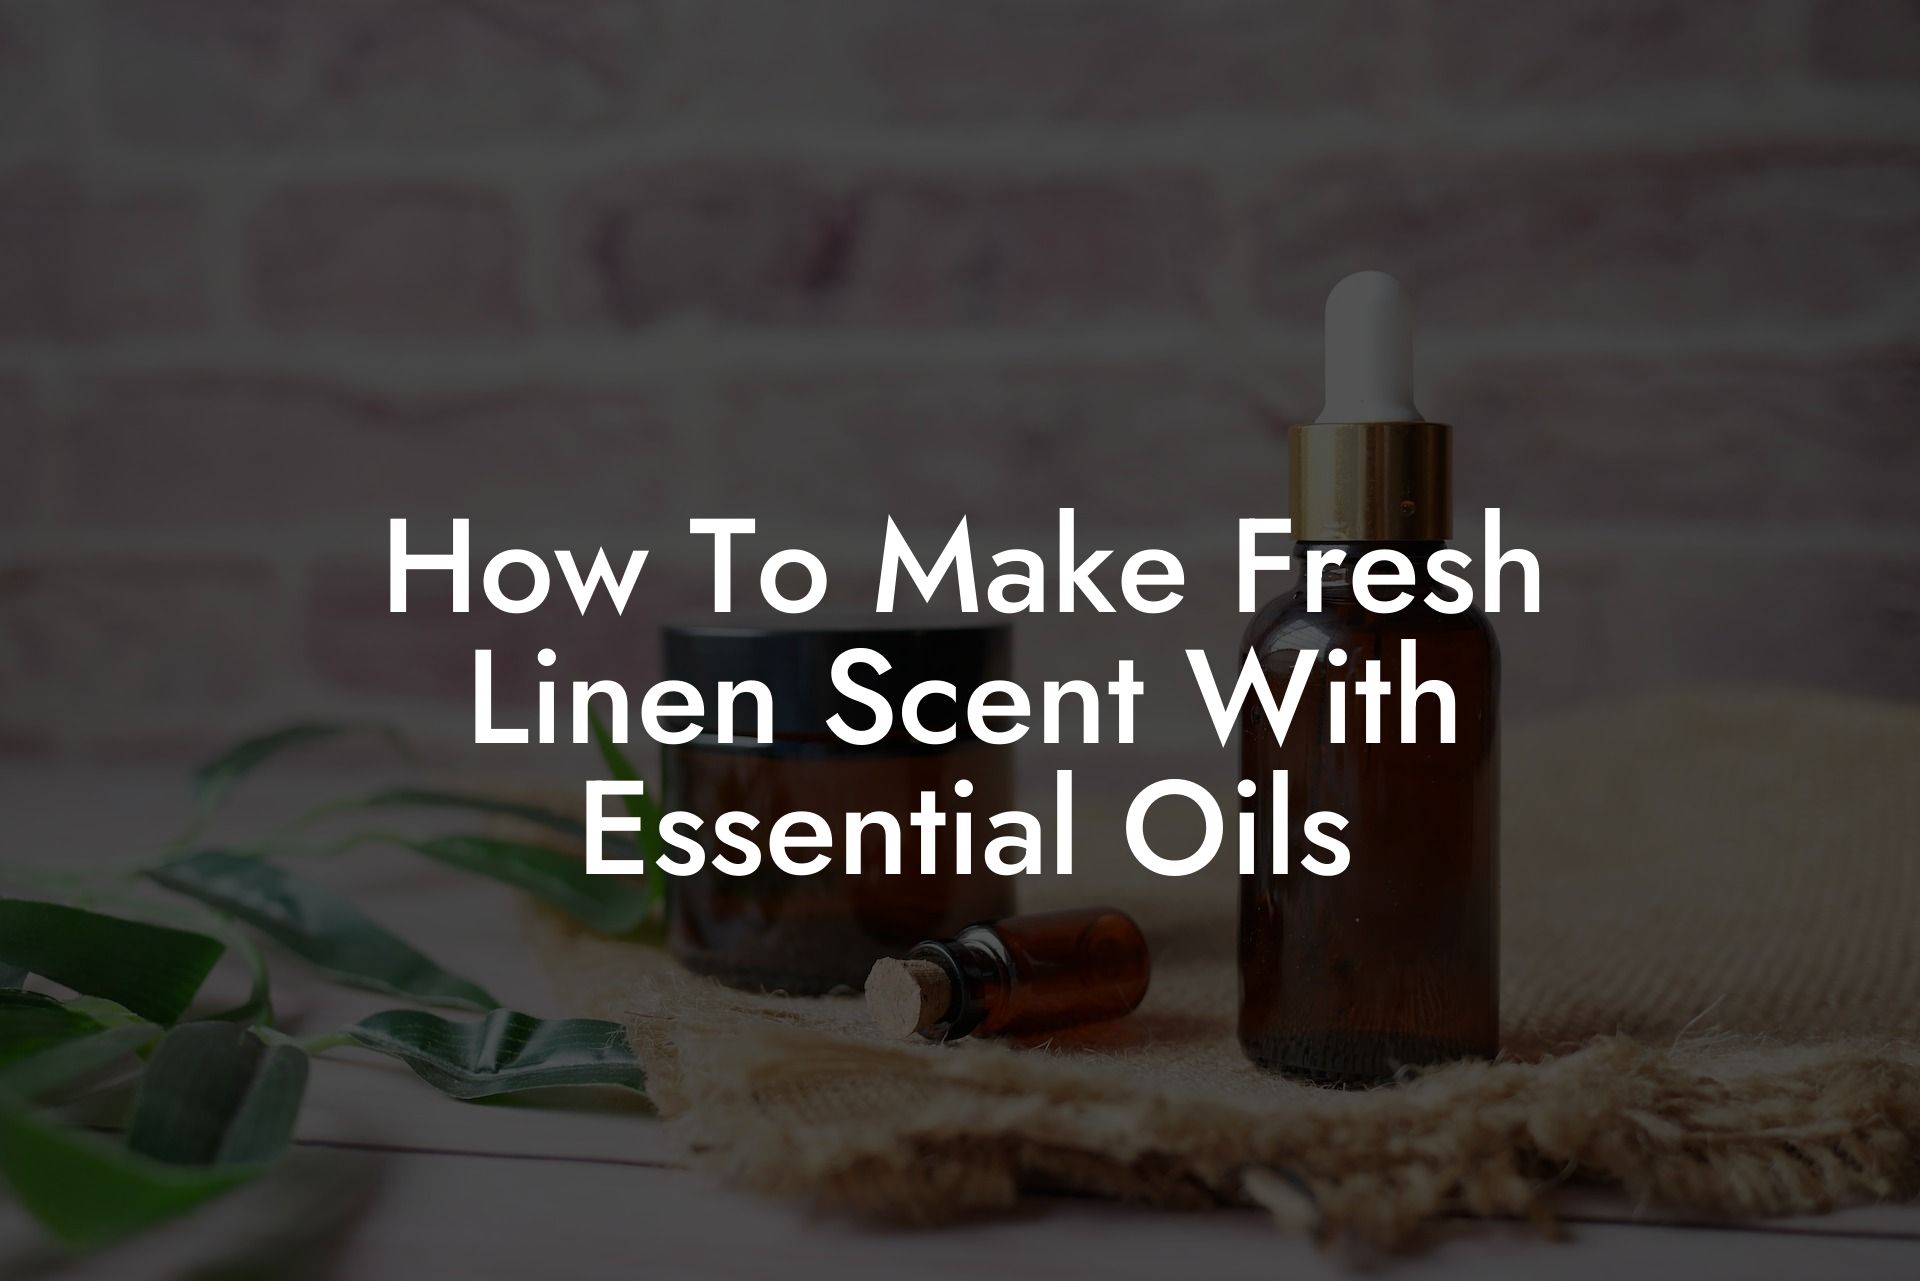 How To Make Fresh Linen Scent With Essential Oils